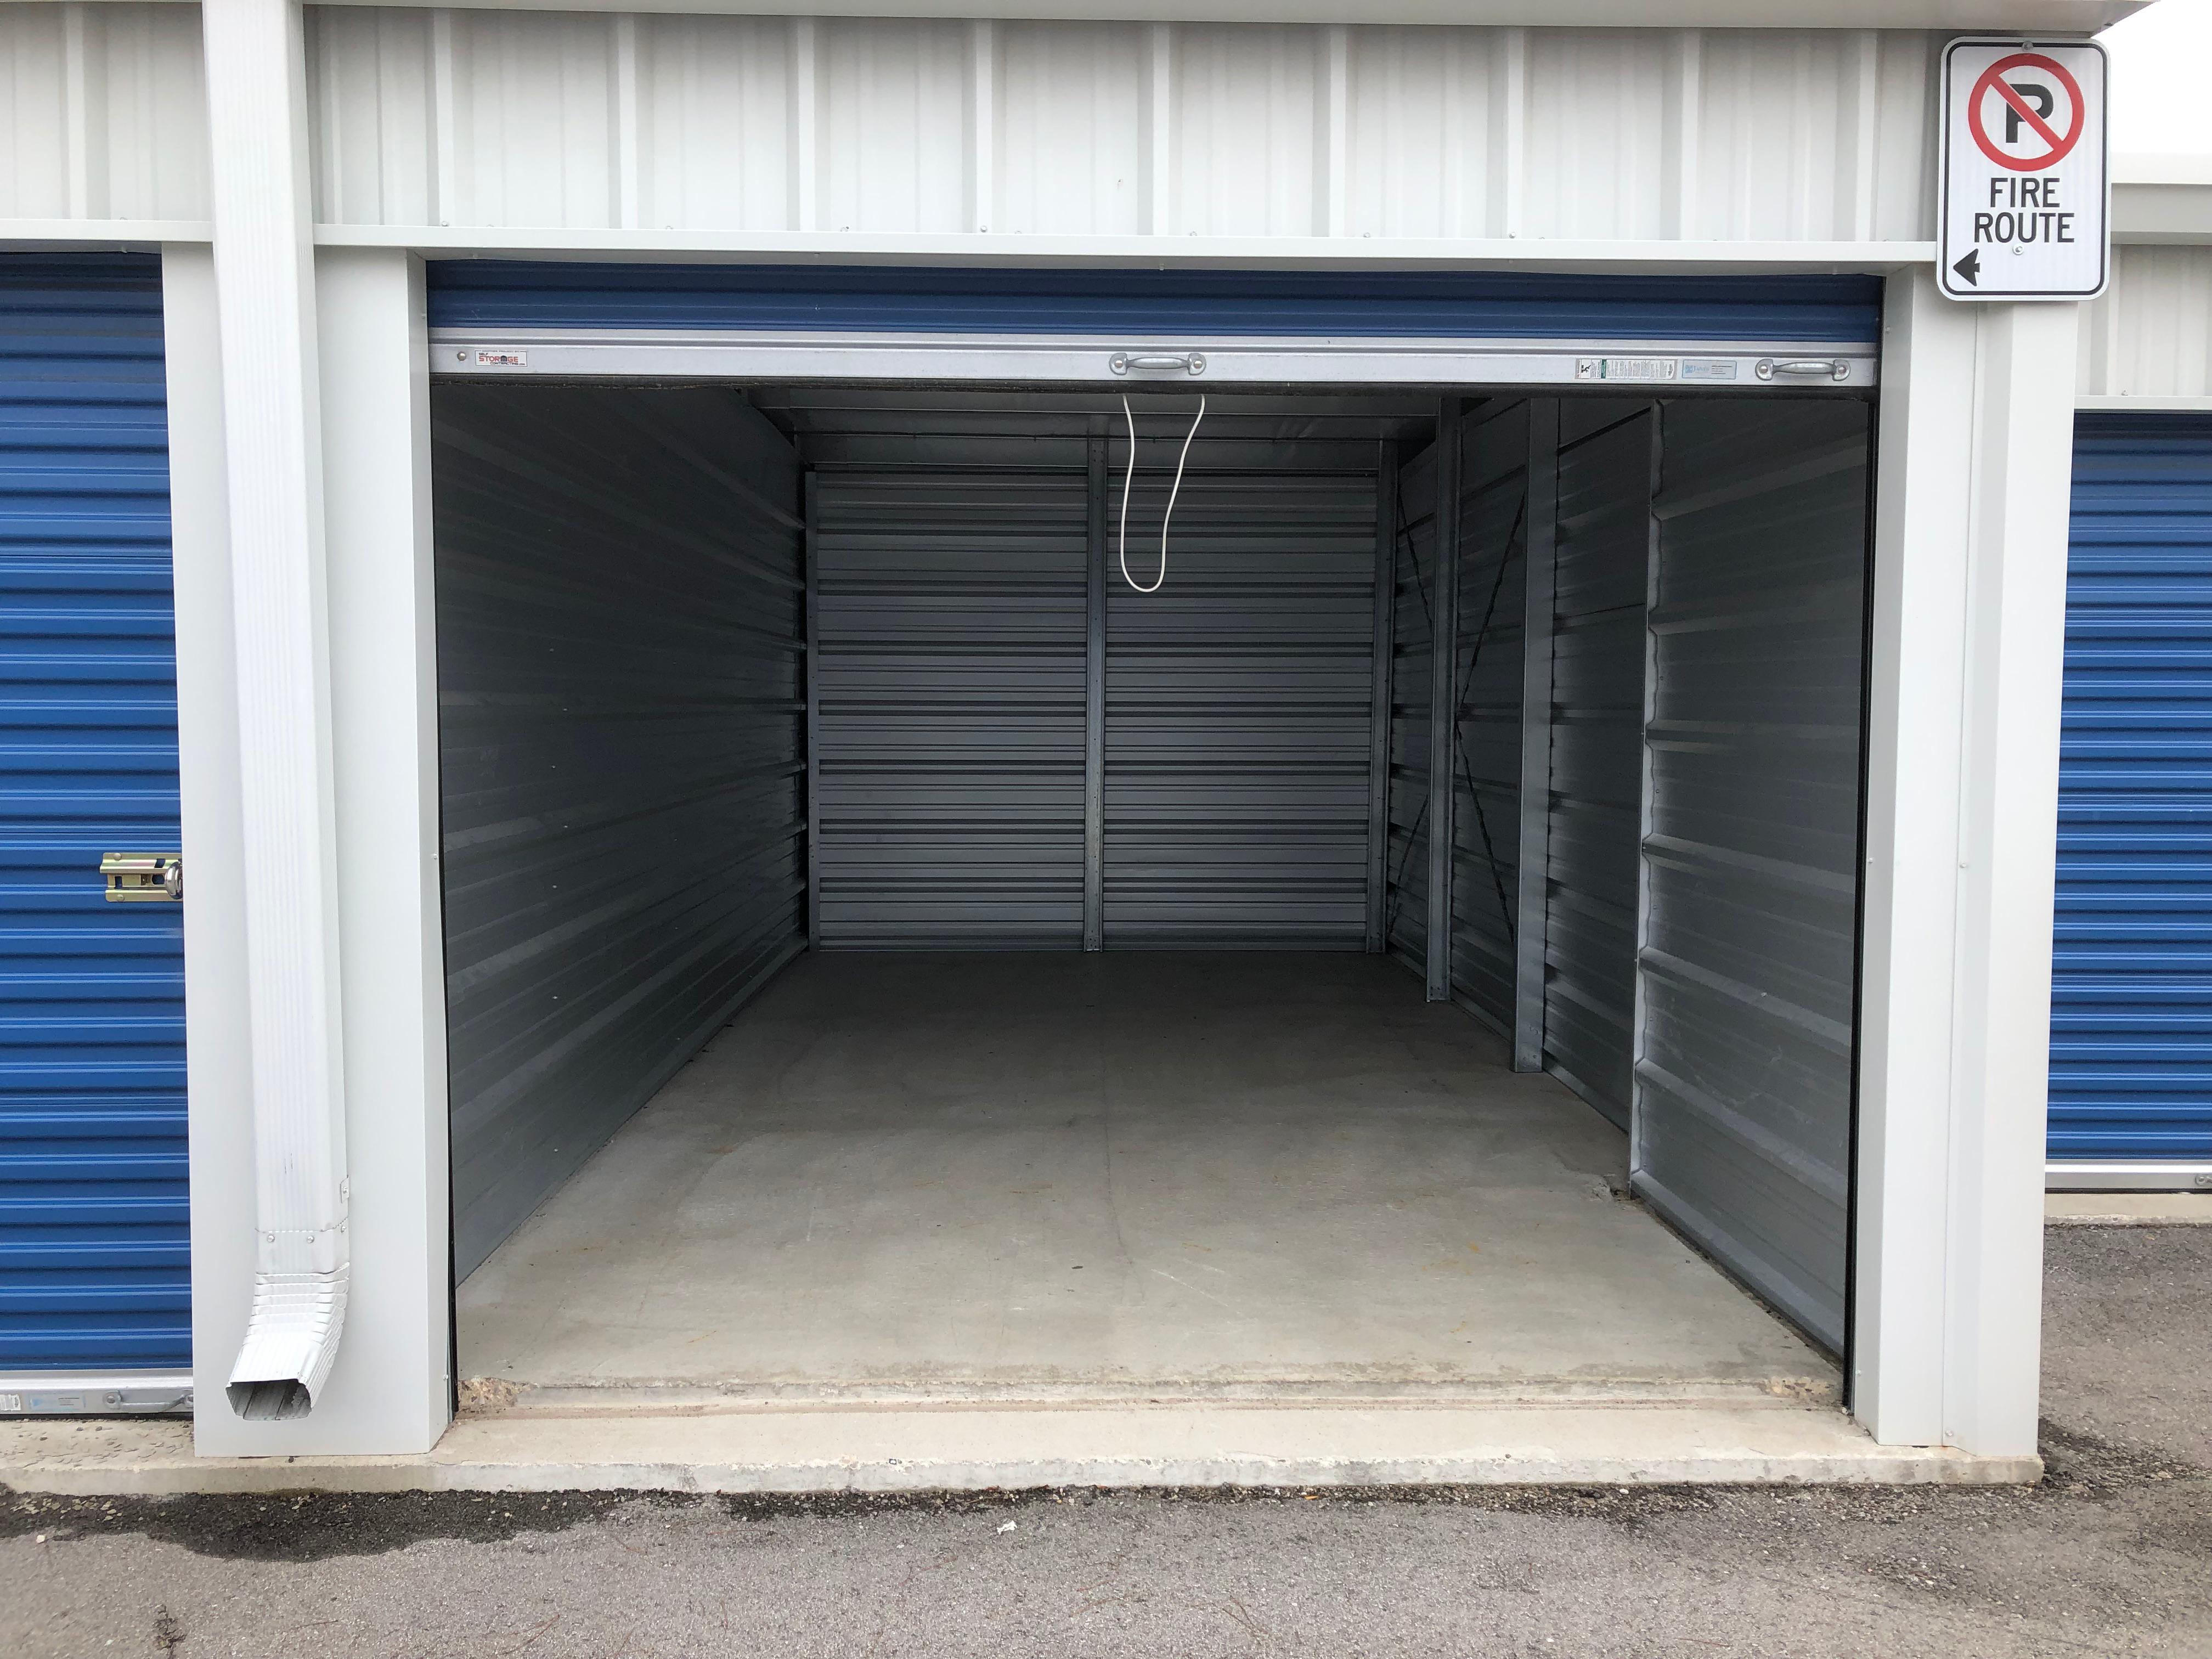 Access Storage - Barrie Mapleview Barrie (705)809-3314